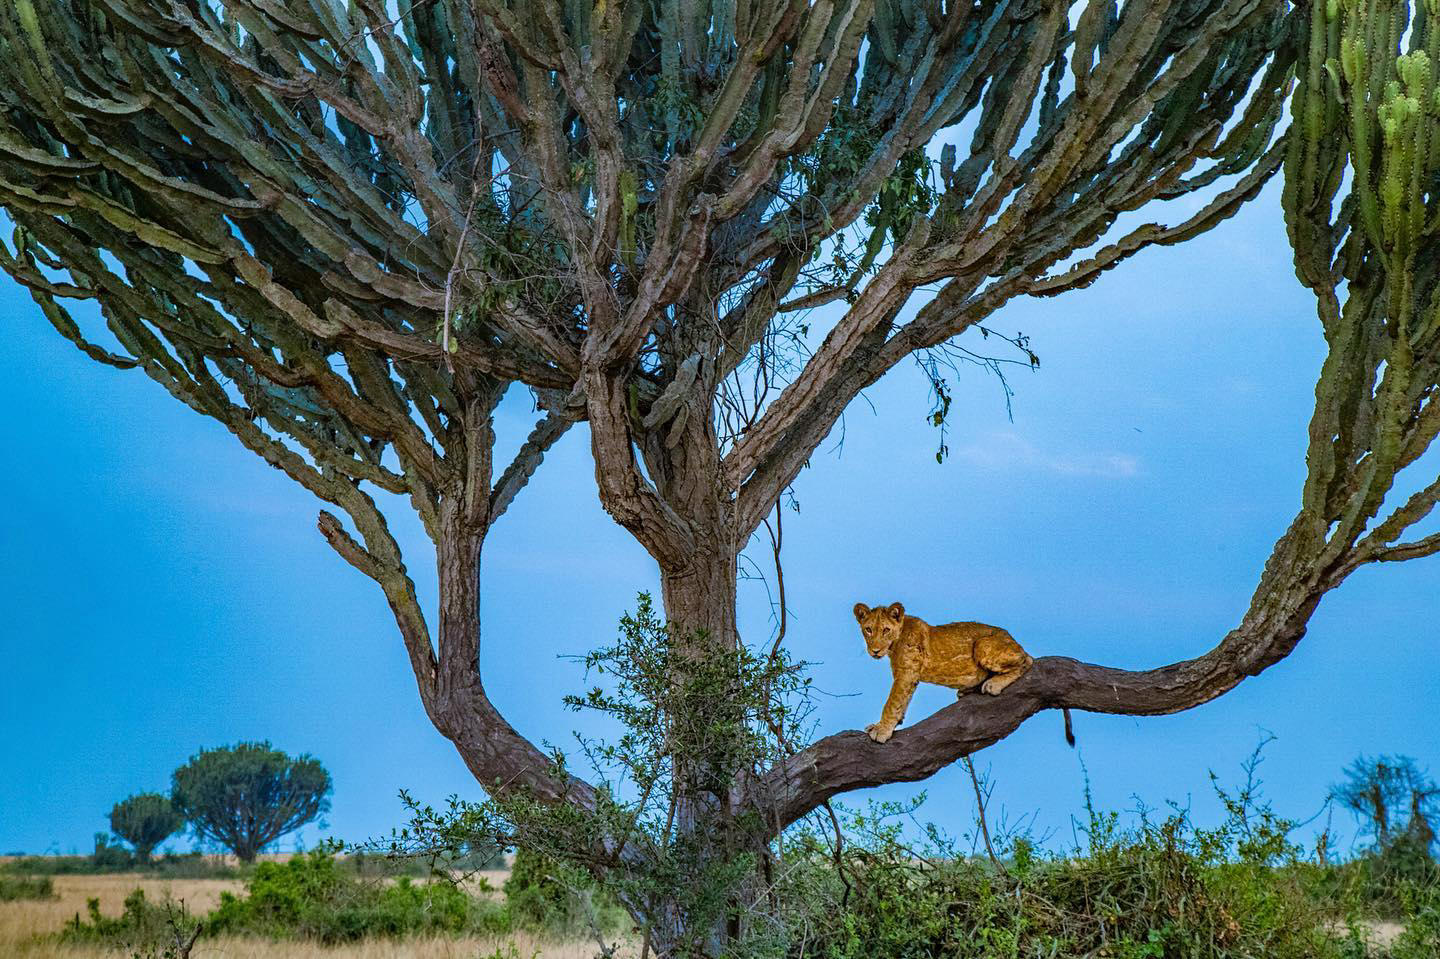 #stevewinterphoto photographed these tree-climbing lions in Uganda and lions in South Africa